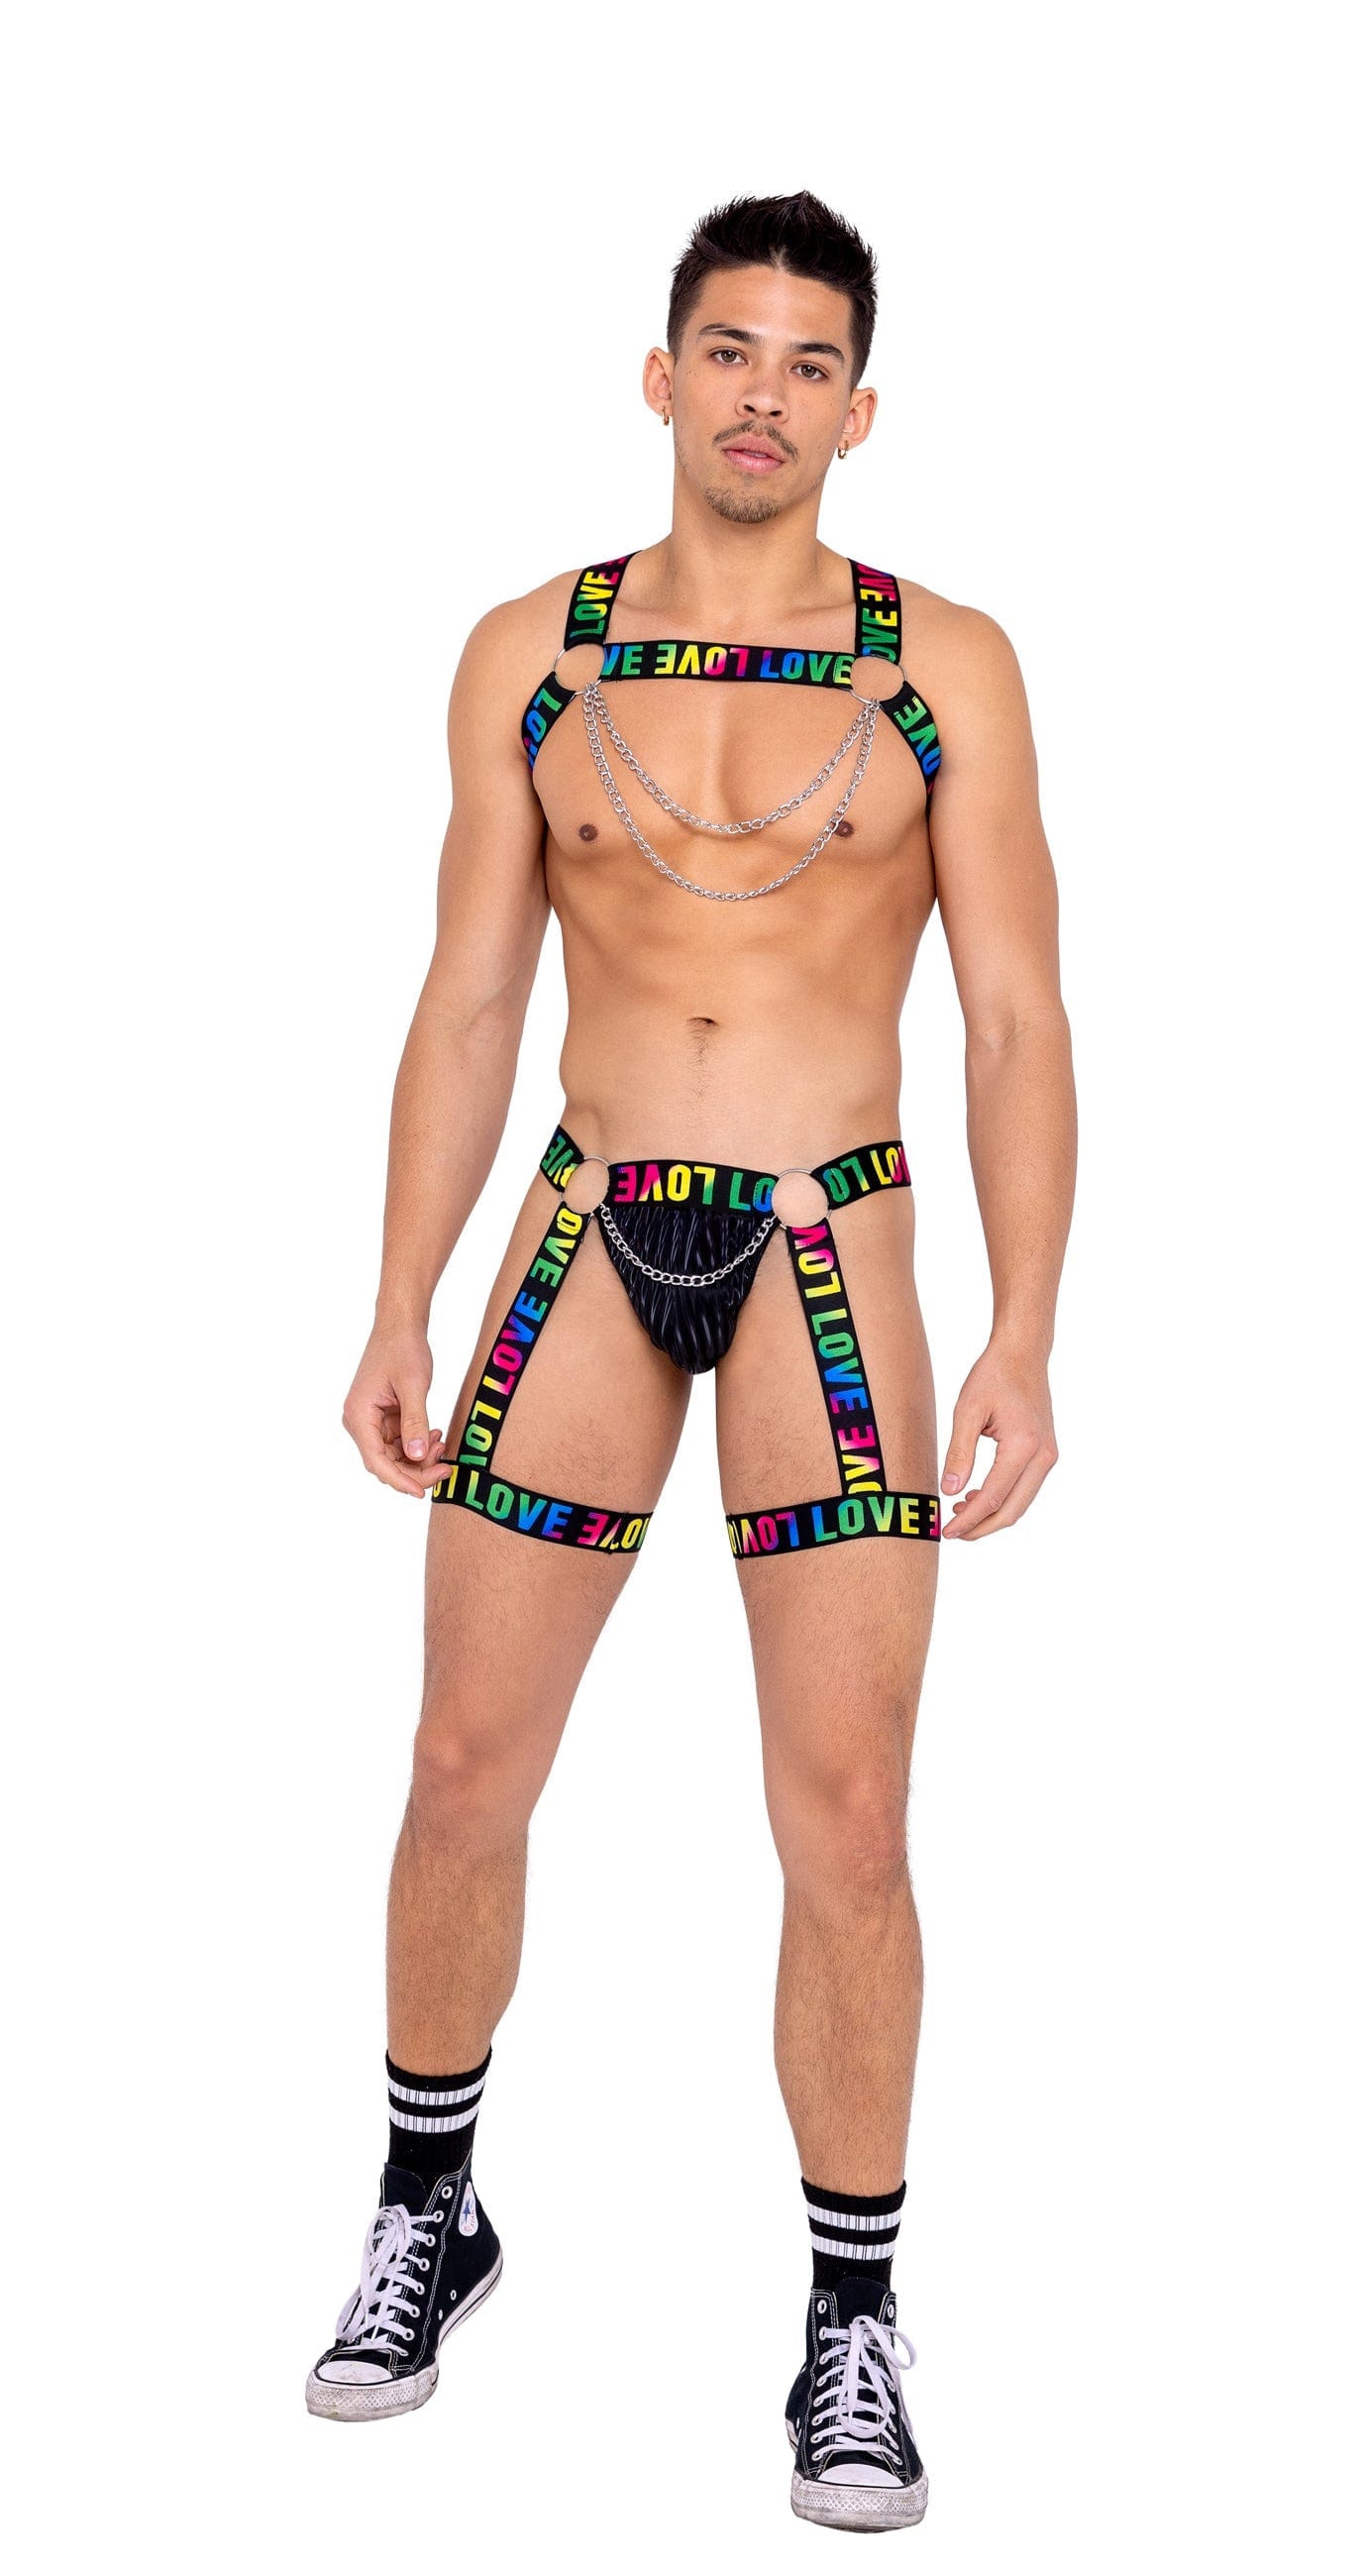 Roma Small / Black Black Men’s Pride Attached Garters & Chain Detail Thong 6158-Blk/Multi-S 2022 Black Men’s Pride Attached Garters Chain Detail Thong Ravewear Apparel & Accessories > Clothing > Shirts & Tops